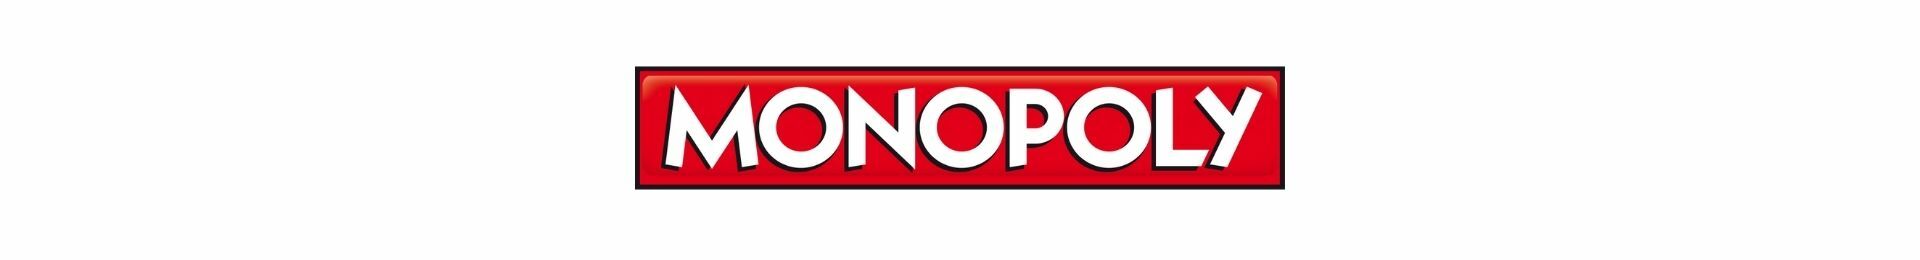 Monopoly Immersive Experience London 2021 banner image